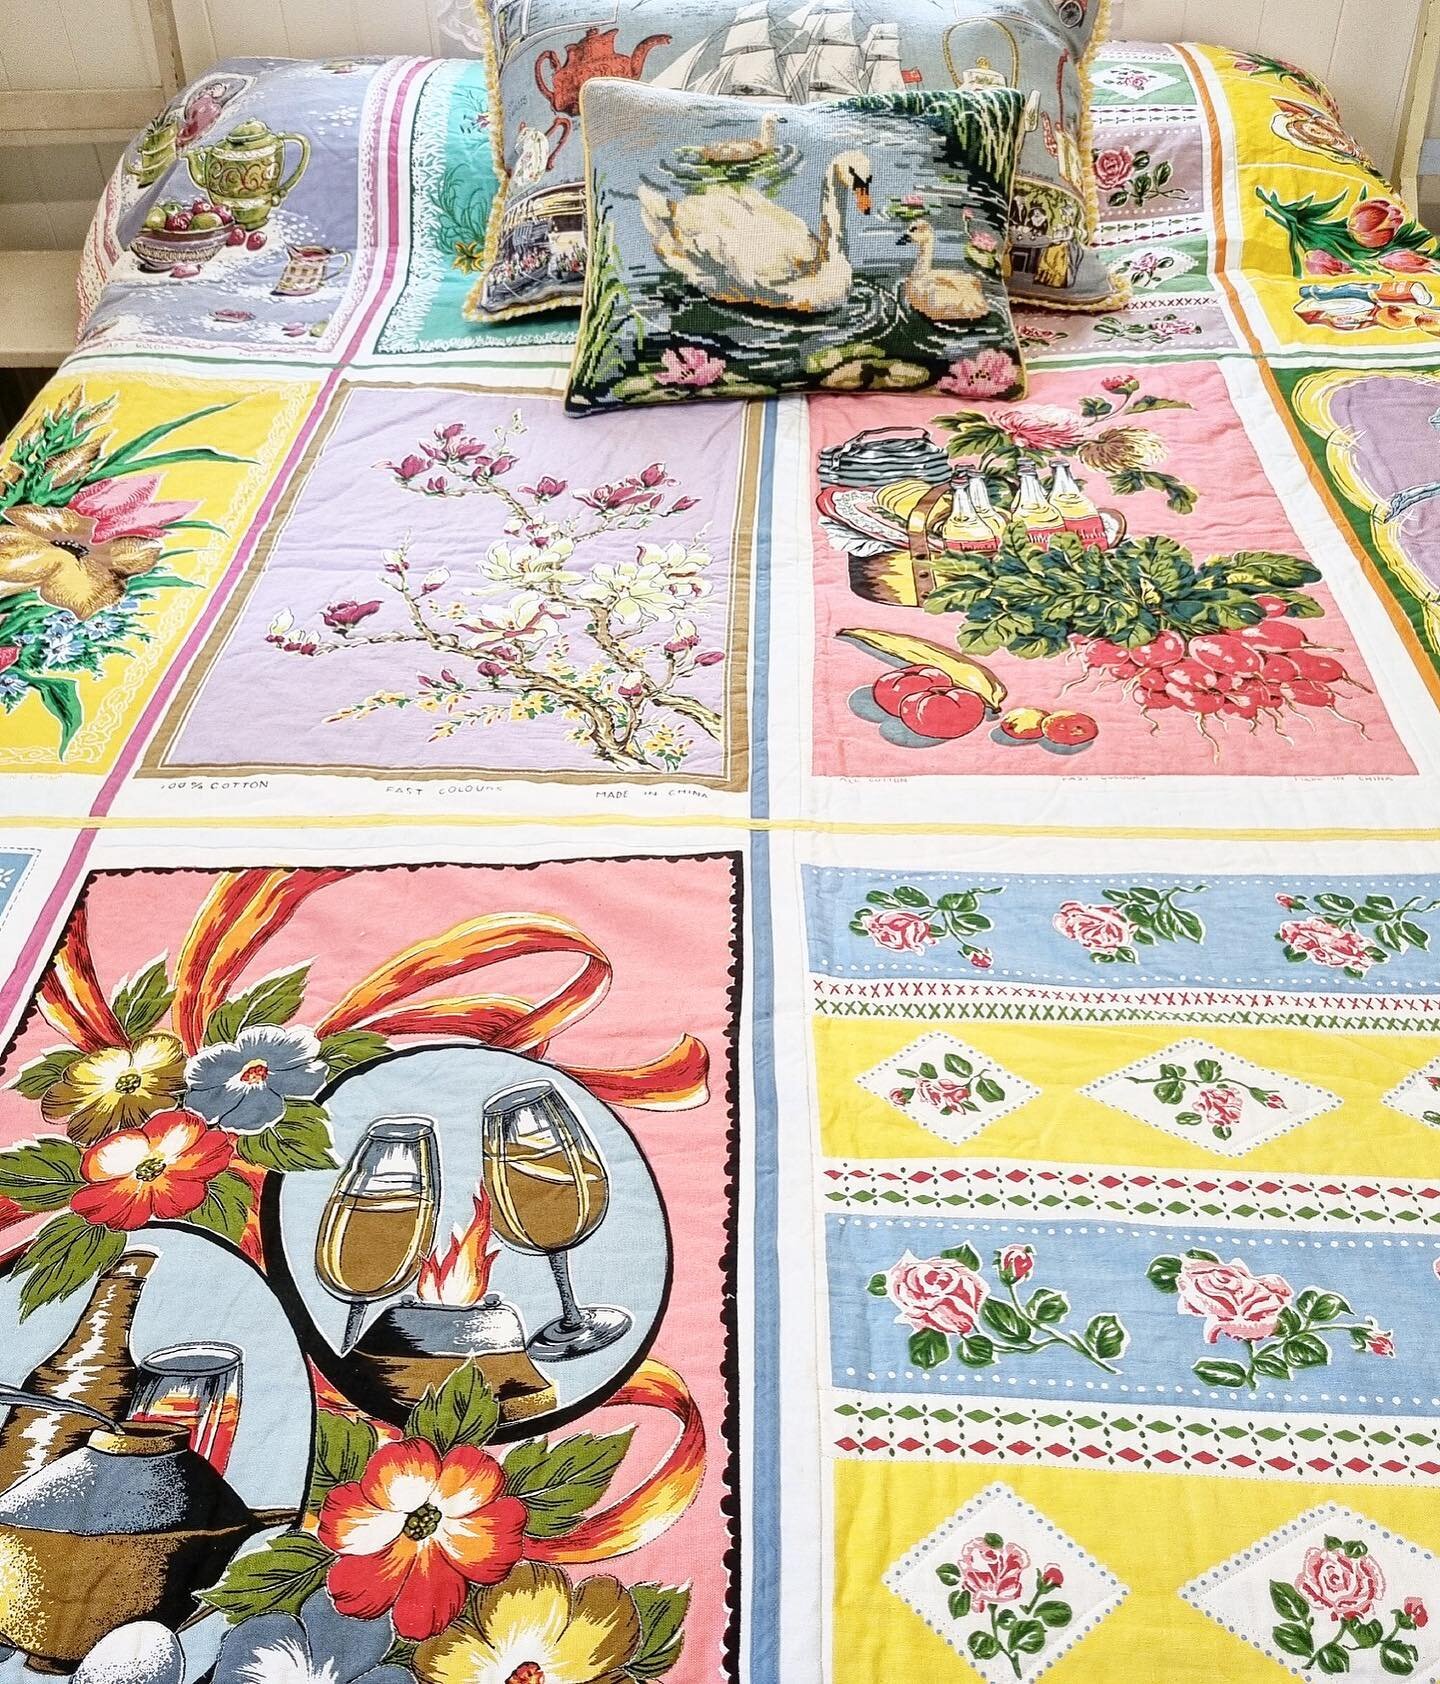 Inside the whimsical farmhouse of designer Kitty Deane in the Northern Rivers area of NSW.
Showcasing a variety of her superb vintage quilts created from a collection of vintage tea towels, fabrics and trims. Discover her quilt collection online at E